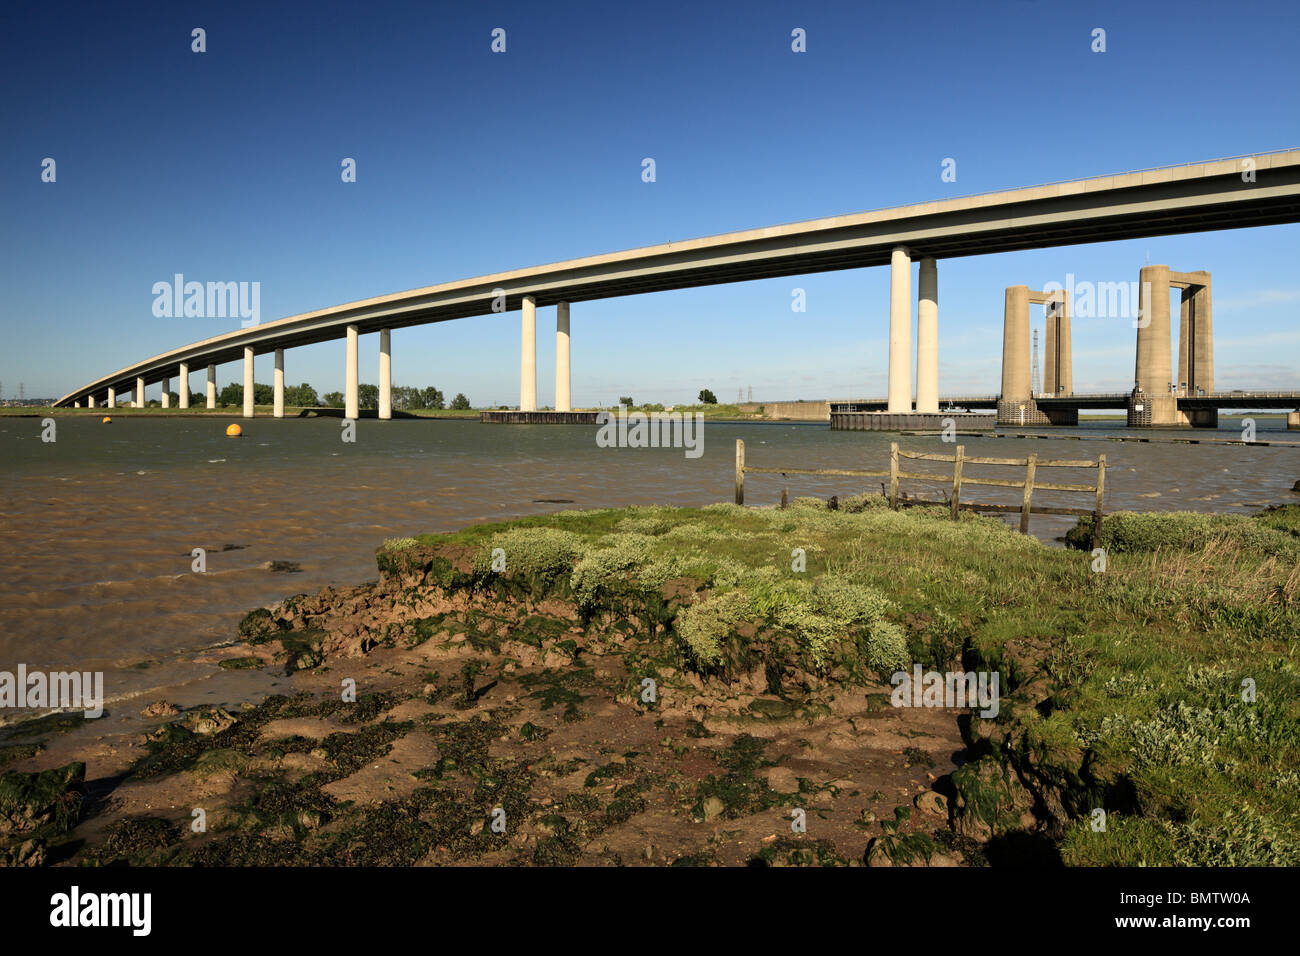 The new Isle of Sheppey crossing towers over the old Kingsferry crossing. Stock Photo